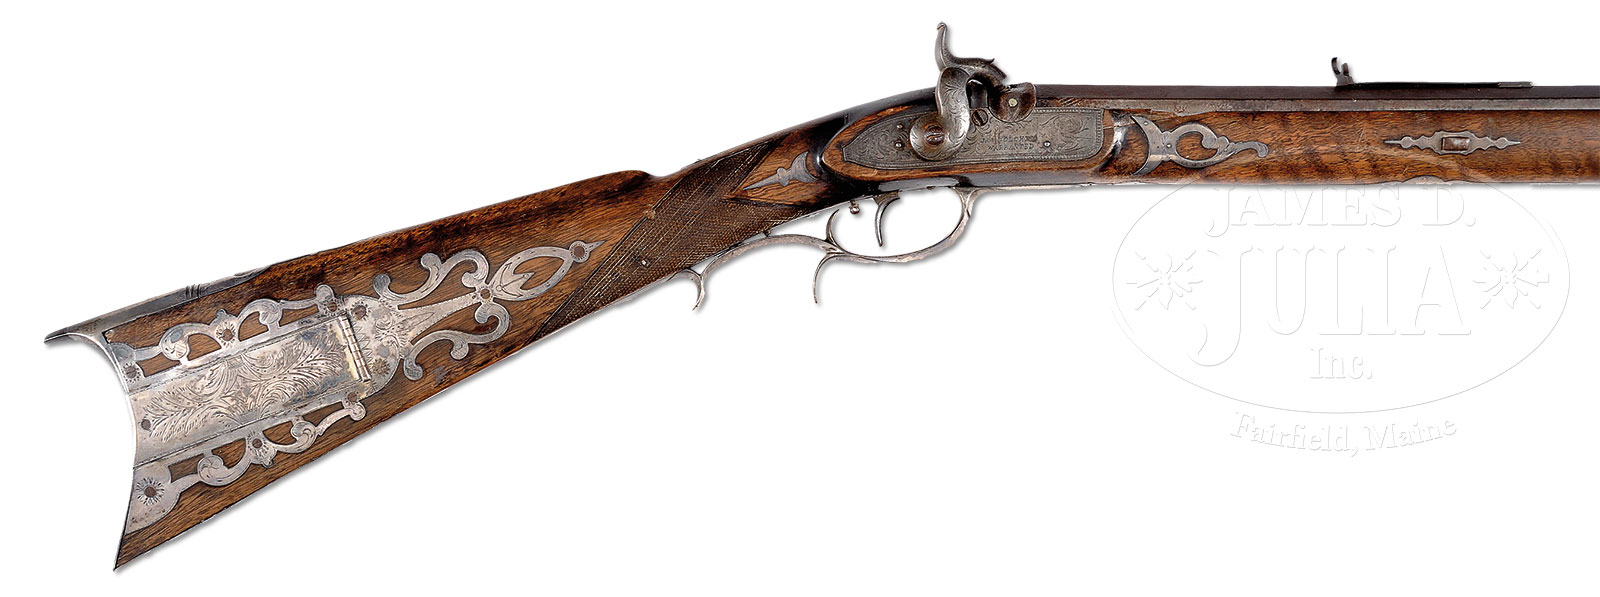 ICONIC AND HISTORIC SILVER MOUNTED HAWKEN RIFLE OF GEORGE W. ATCHISON, ST. LOUIS, MO, 1836.